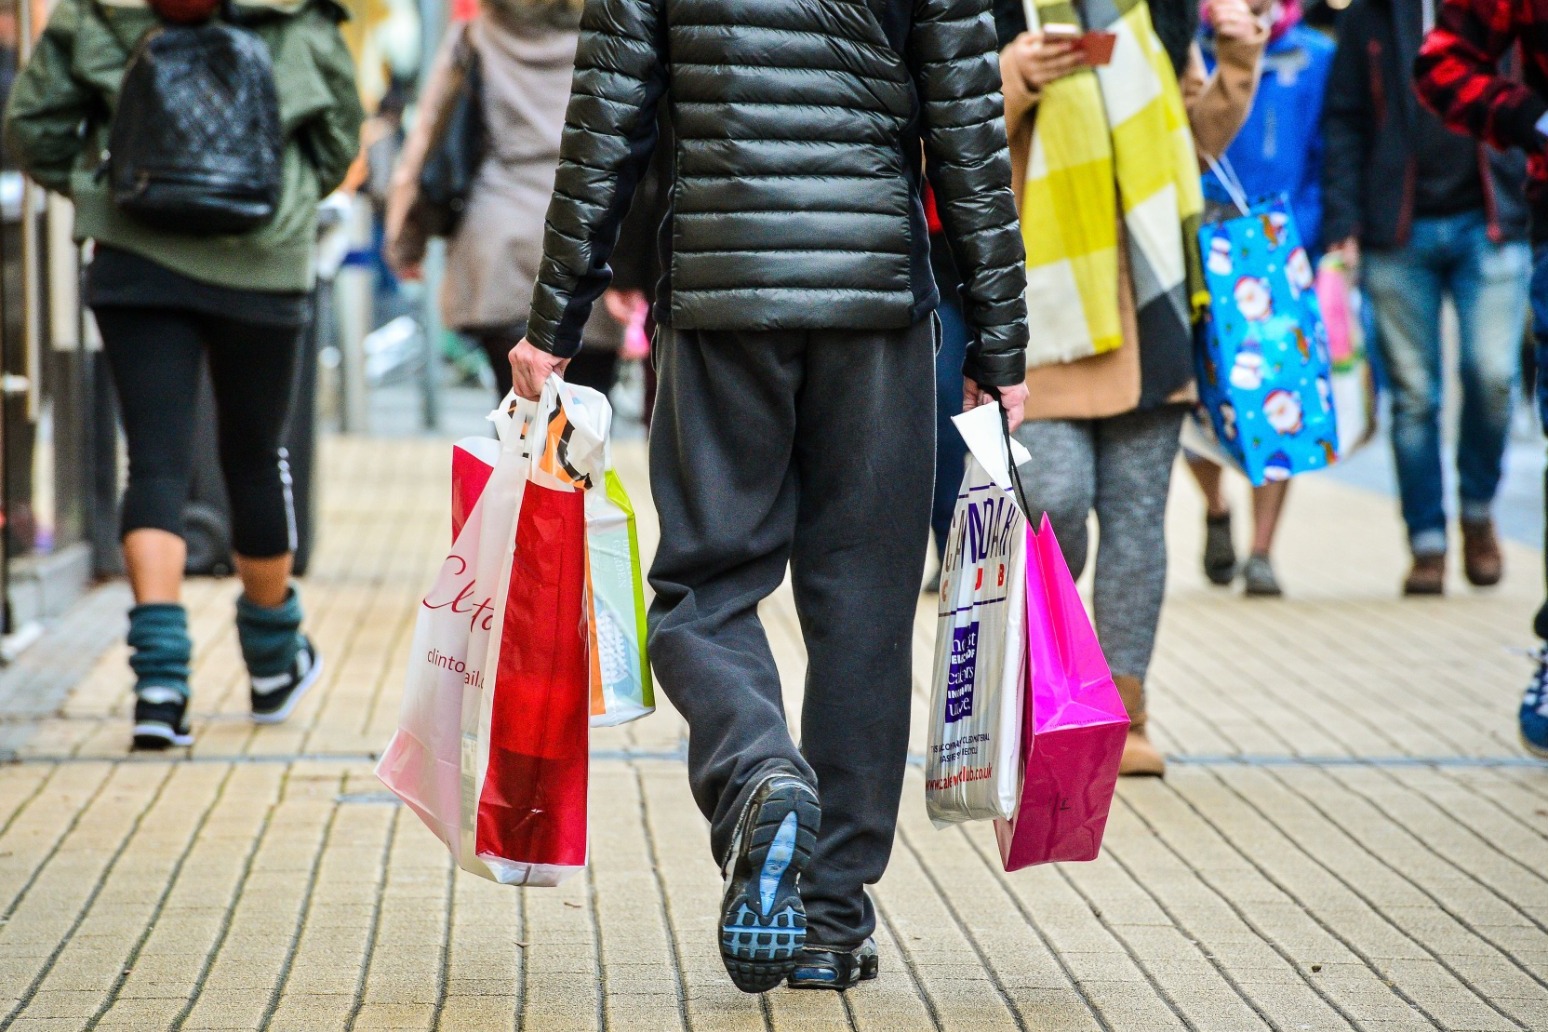 Cost of shoplifting hits record high 